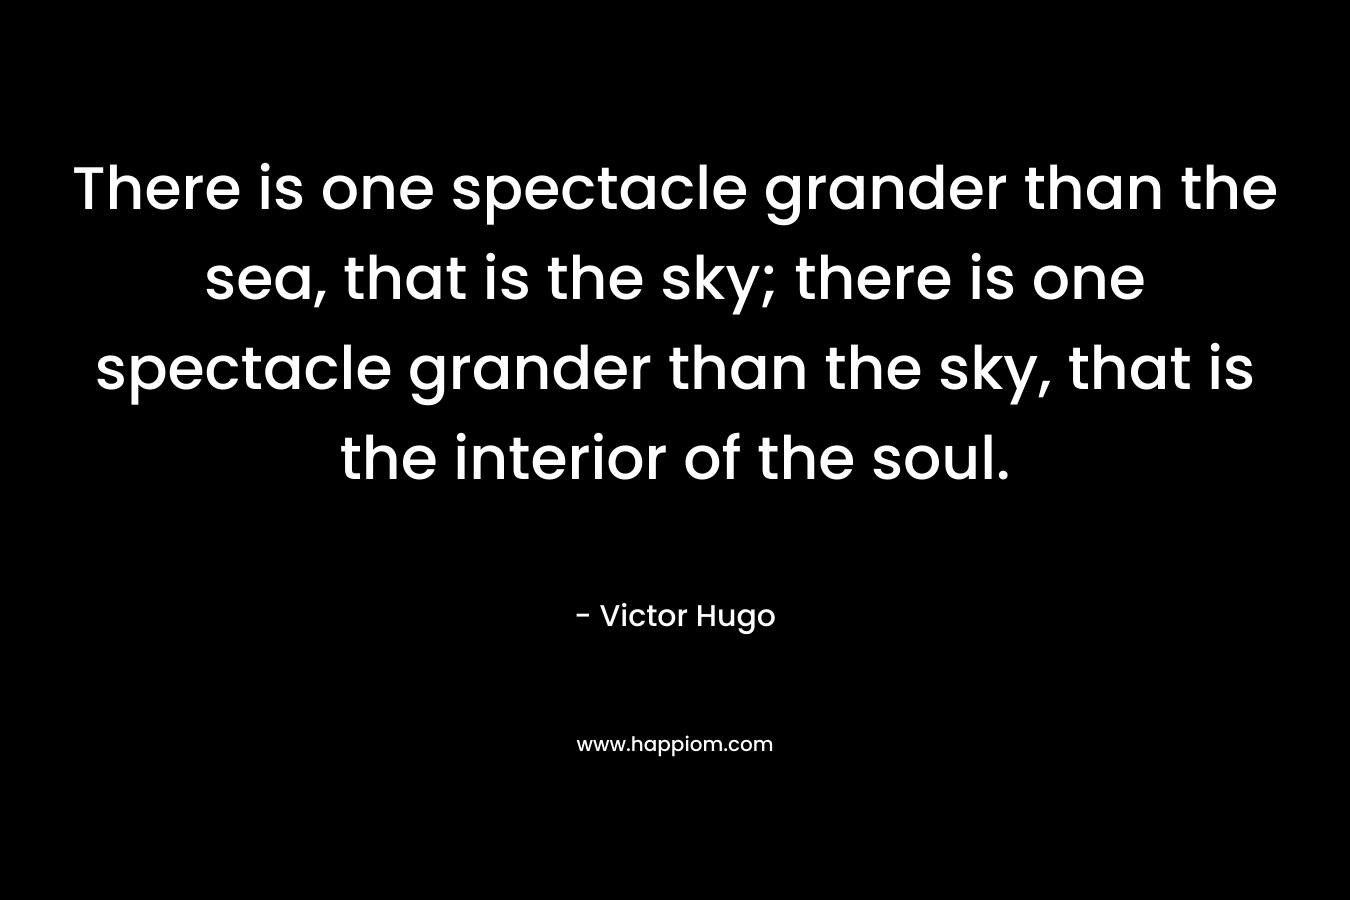 There is one spectacle grander than the sea, that is the sky; there is one spectacle grander than the sky, that is the interior of the soul.